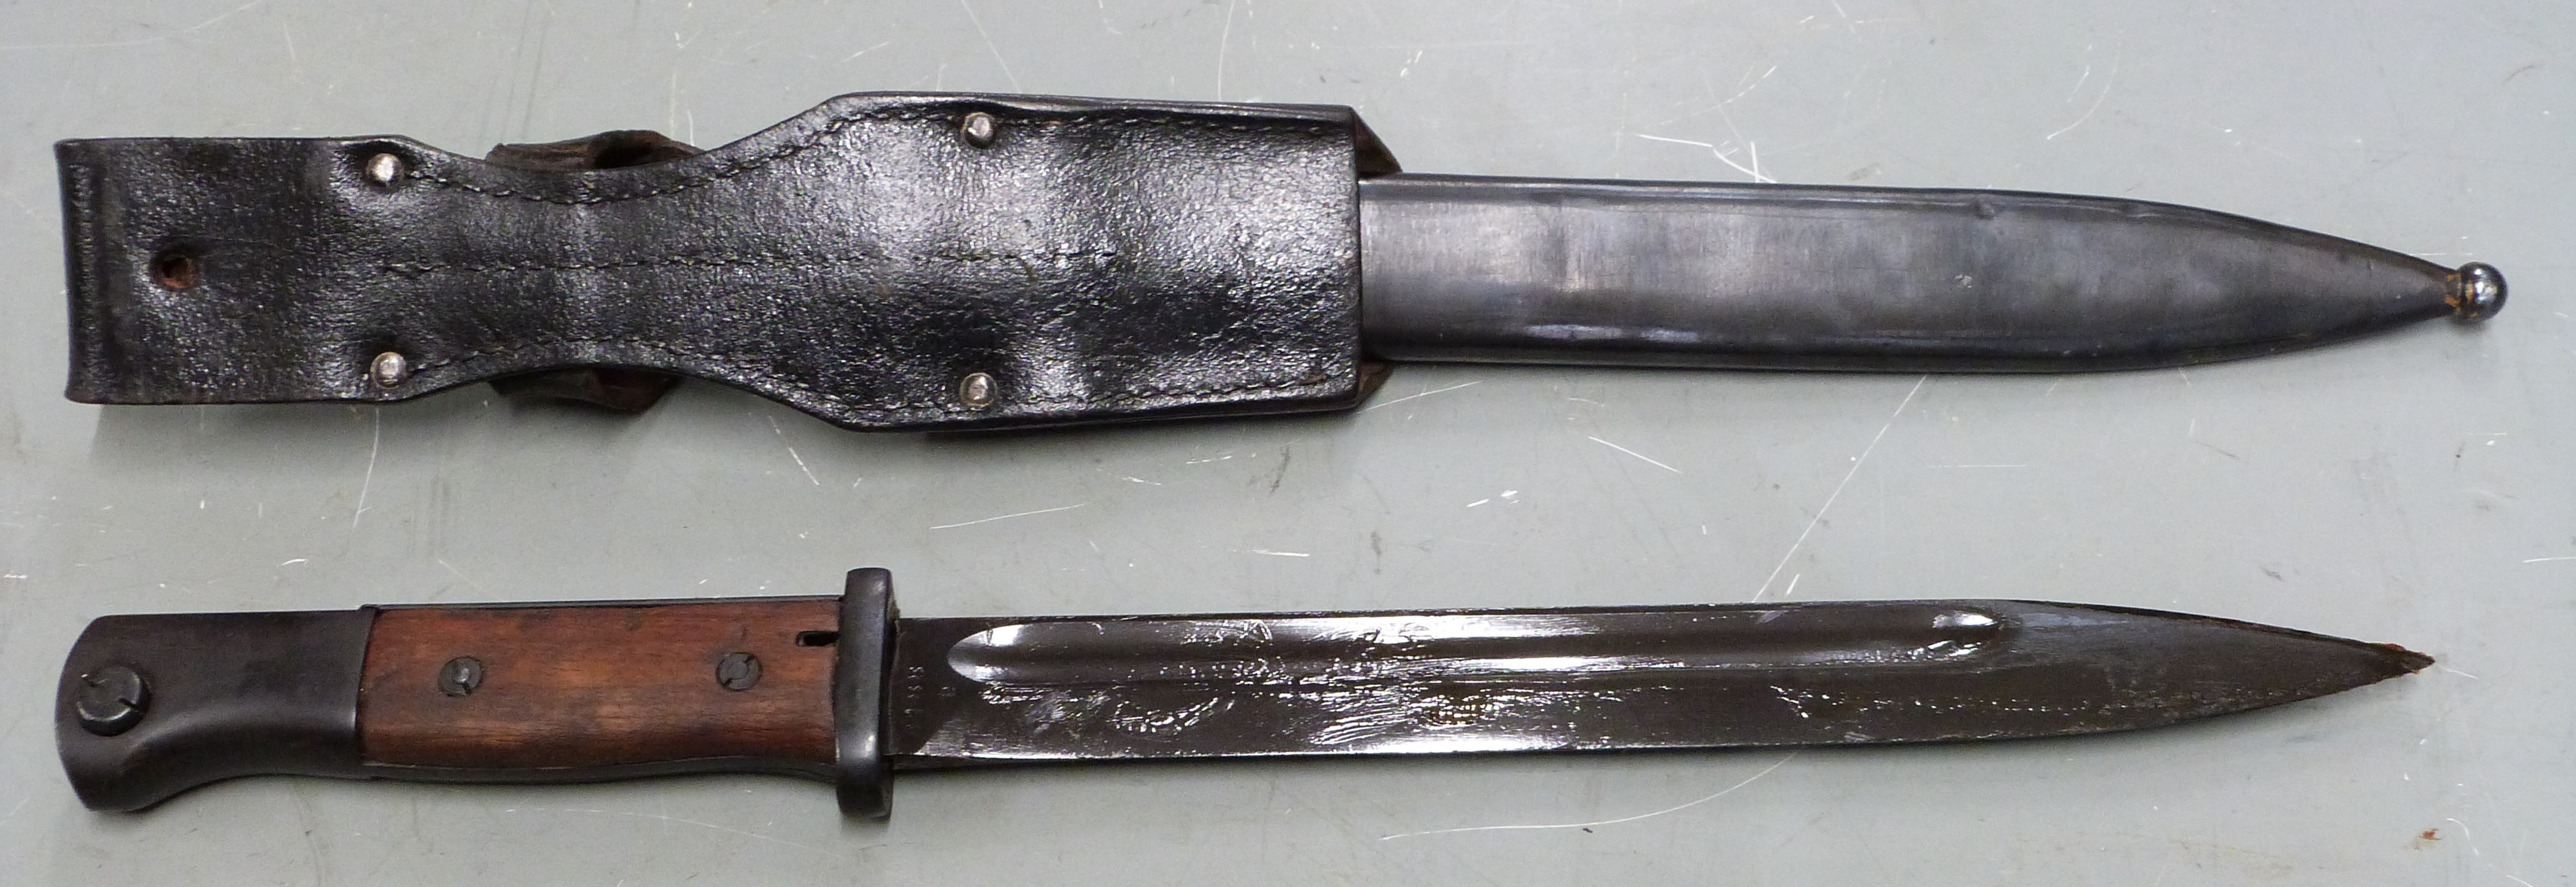 German 84/98 pattern bayonet with flashguard, Durkopp 8188 to ricasso, 25cm fullered blade, with - Image 2 of 6